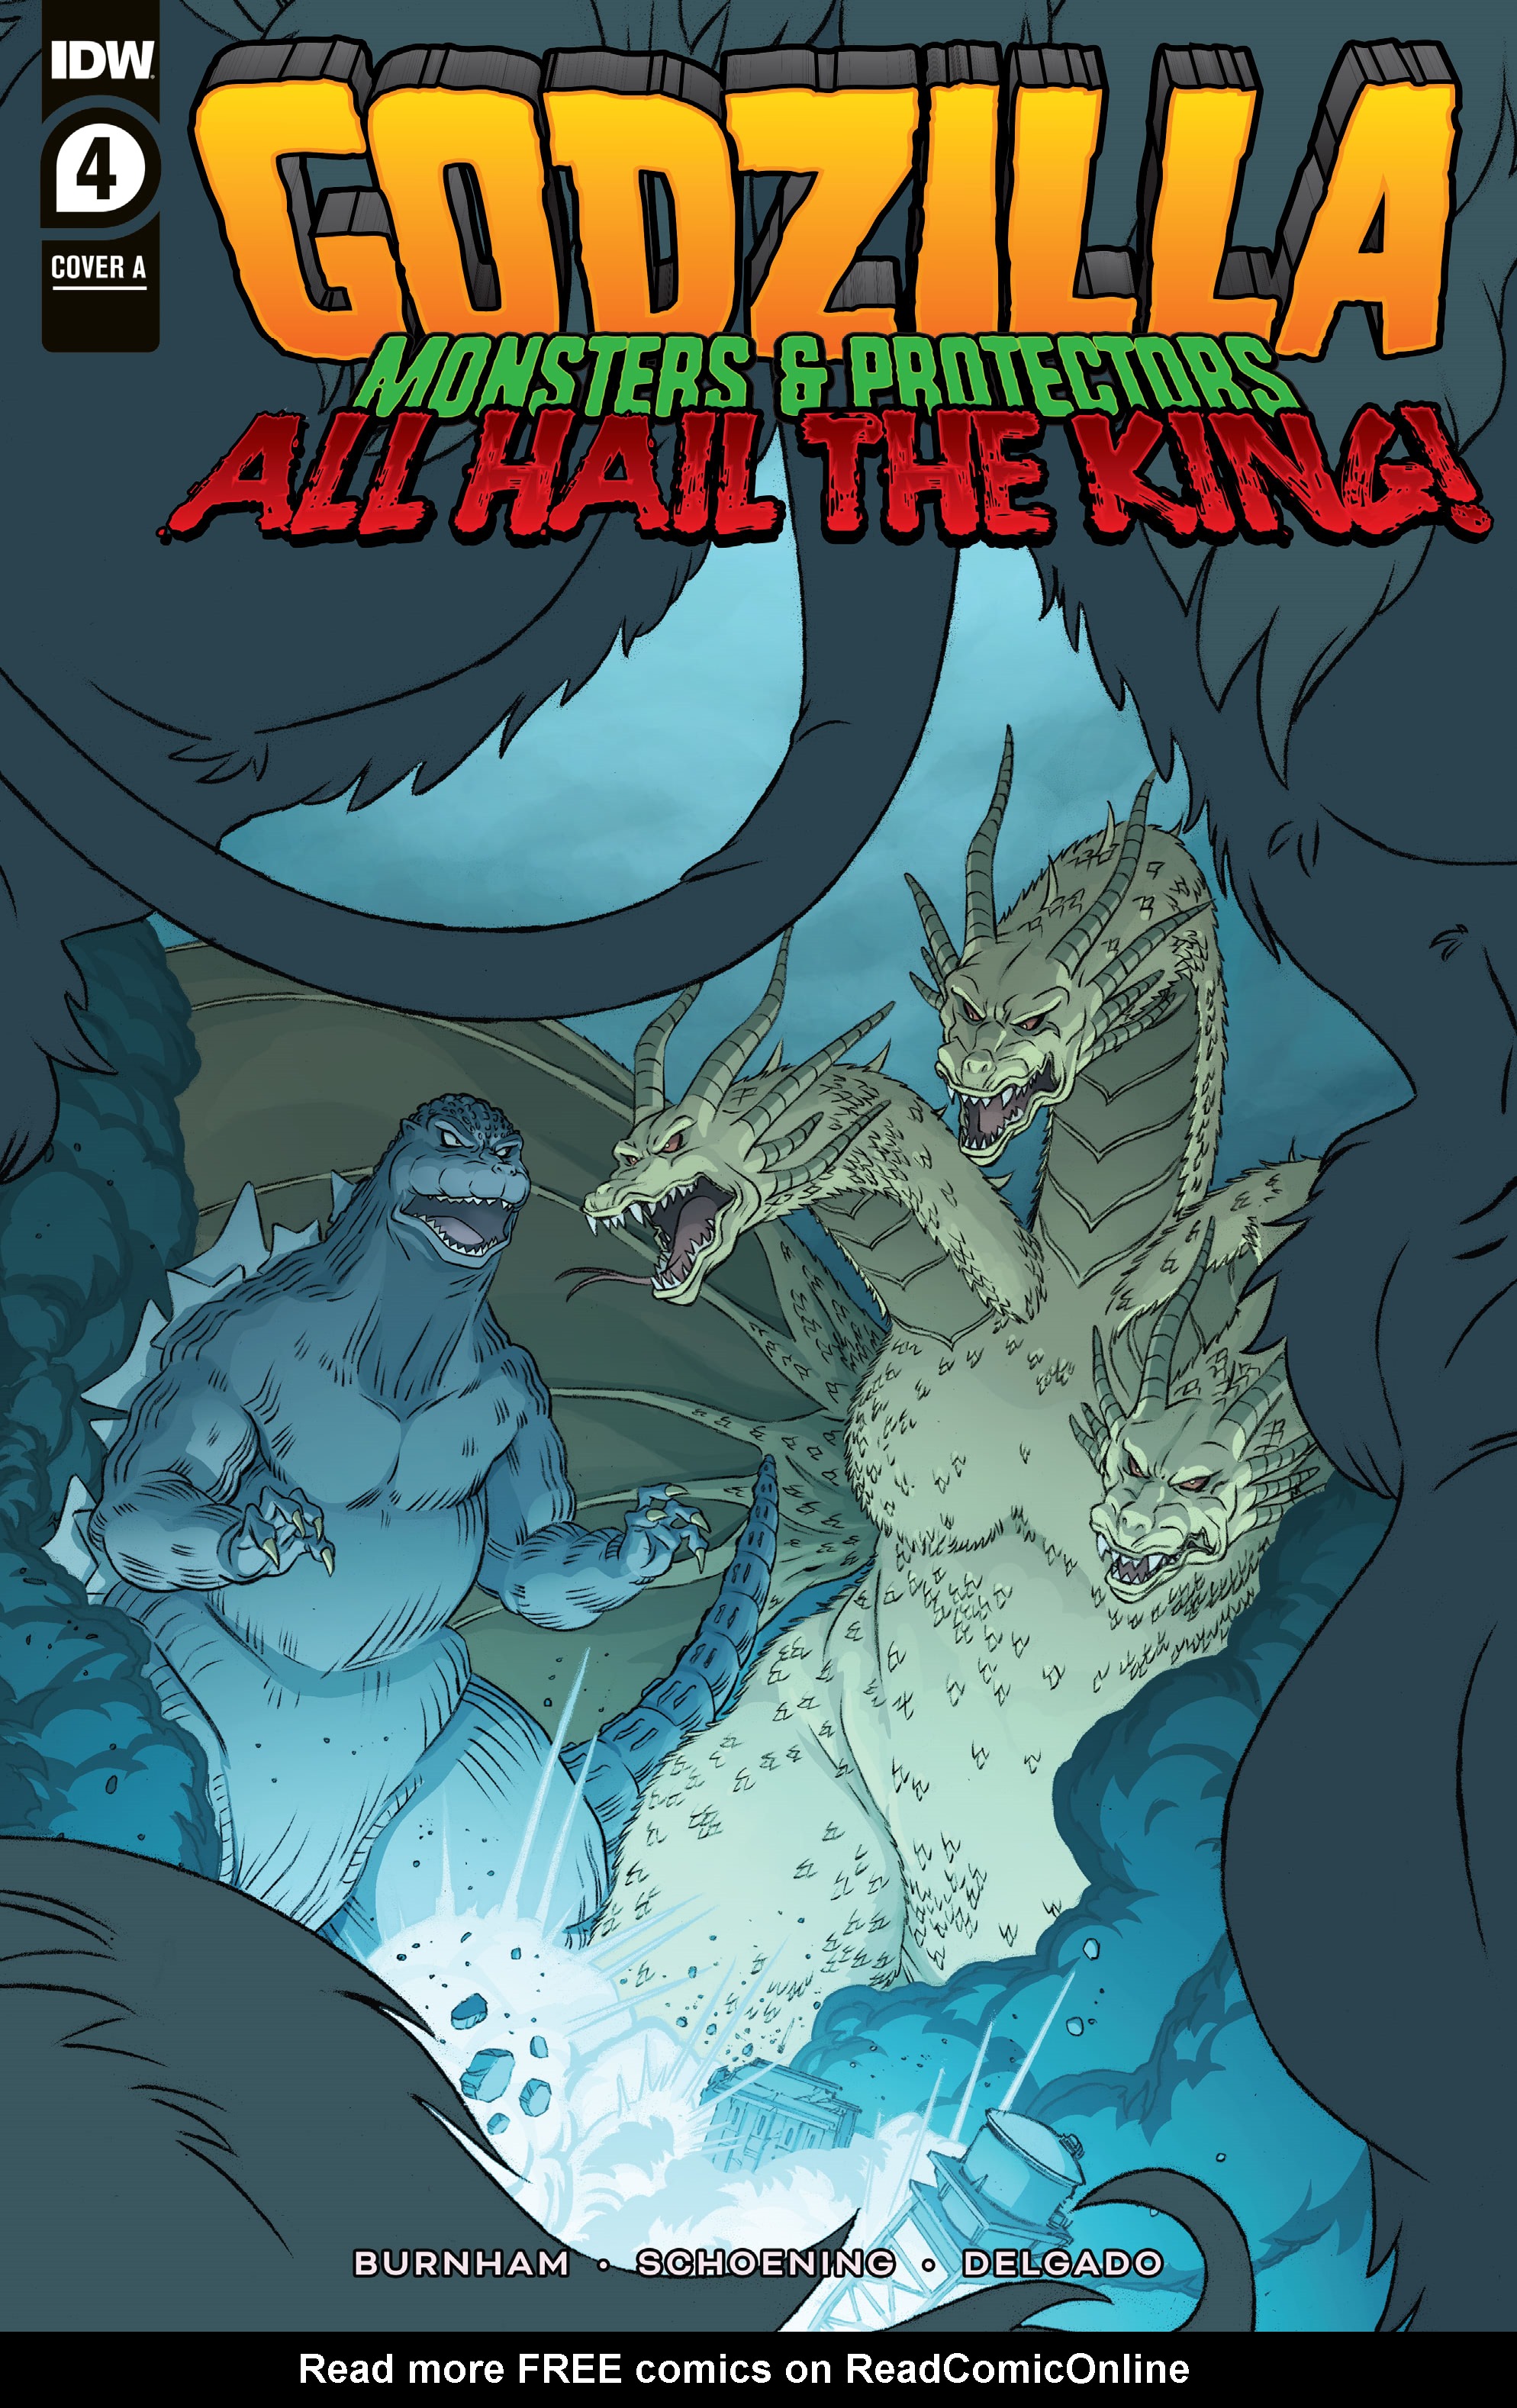 Godzilla: Monsters & Protectors - All Hail the King! issue 4 - Page 1